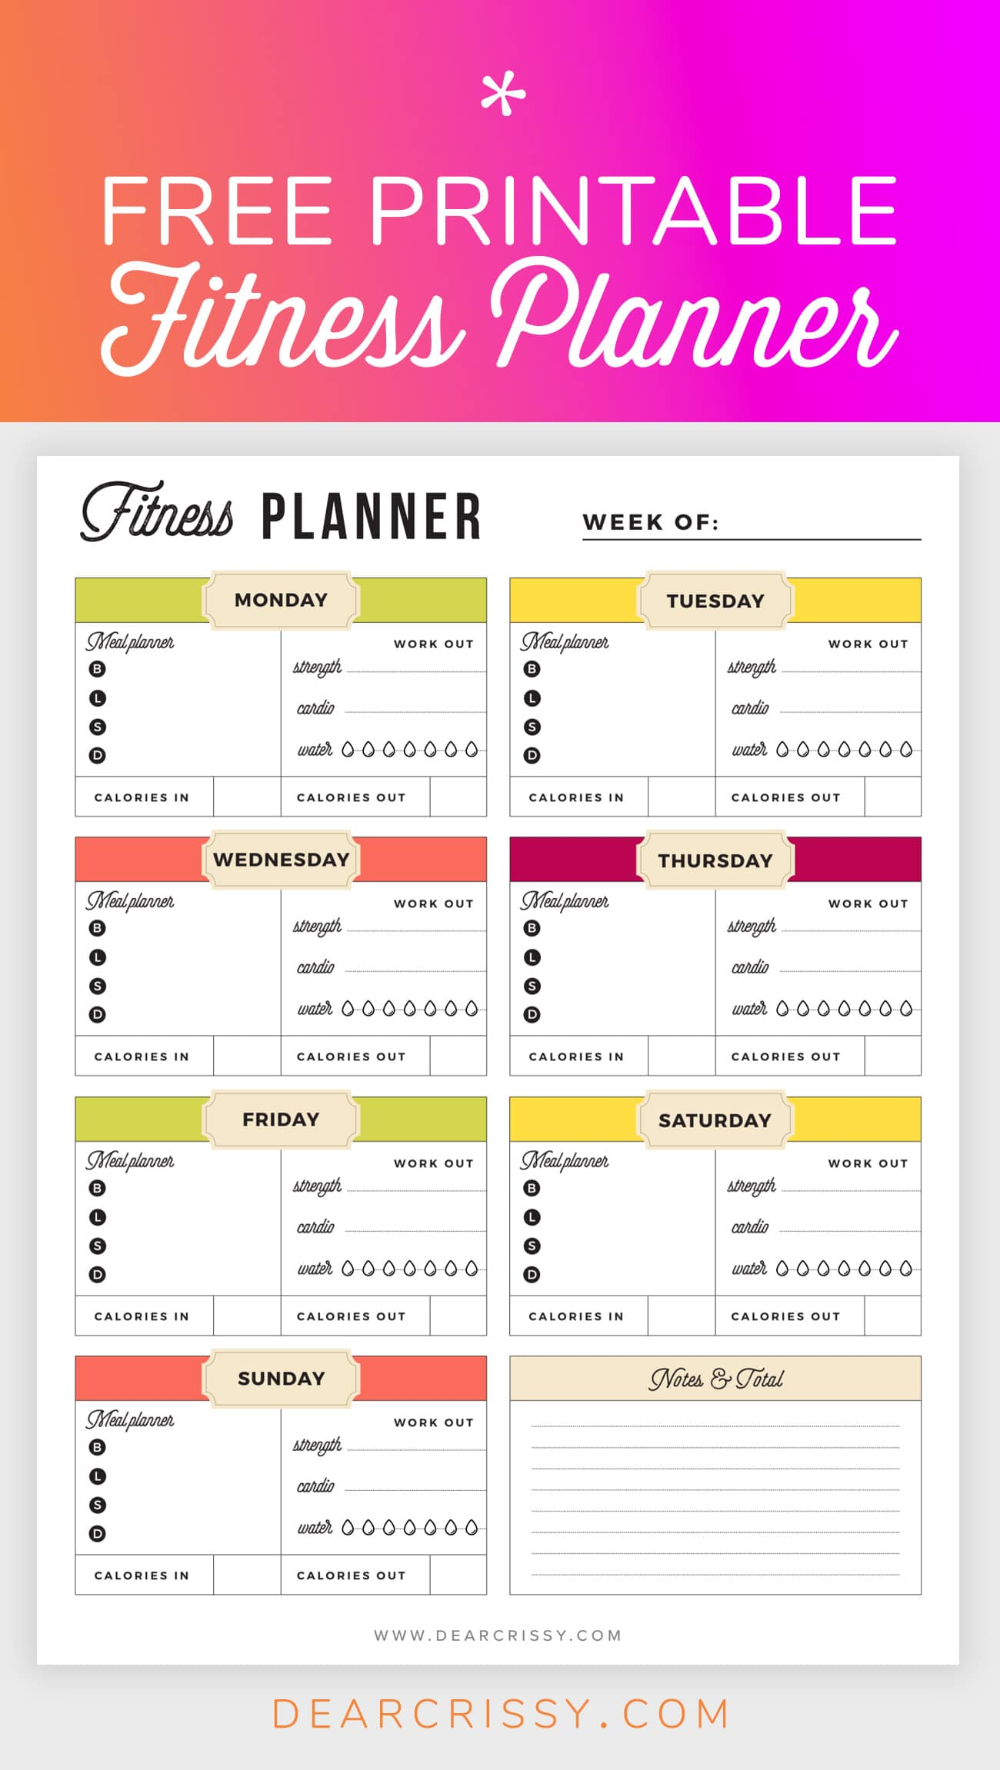 Free Printable Fitness Planner - Meal and Fitness Tracker, Start Today! - Free Printable Fitness Planner - Meal and Fitness Tracker, Start Today! -   fitness Planner inspiration